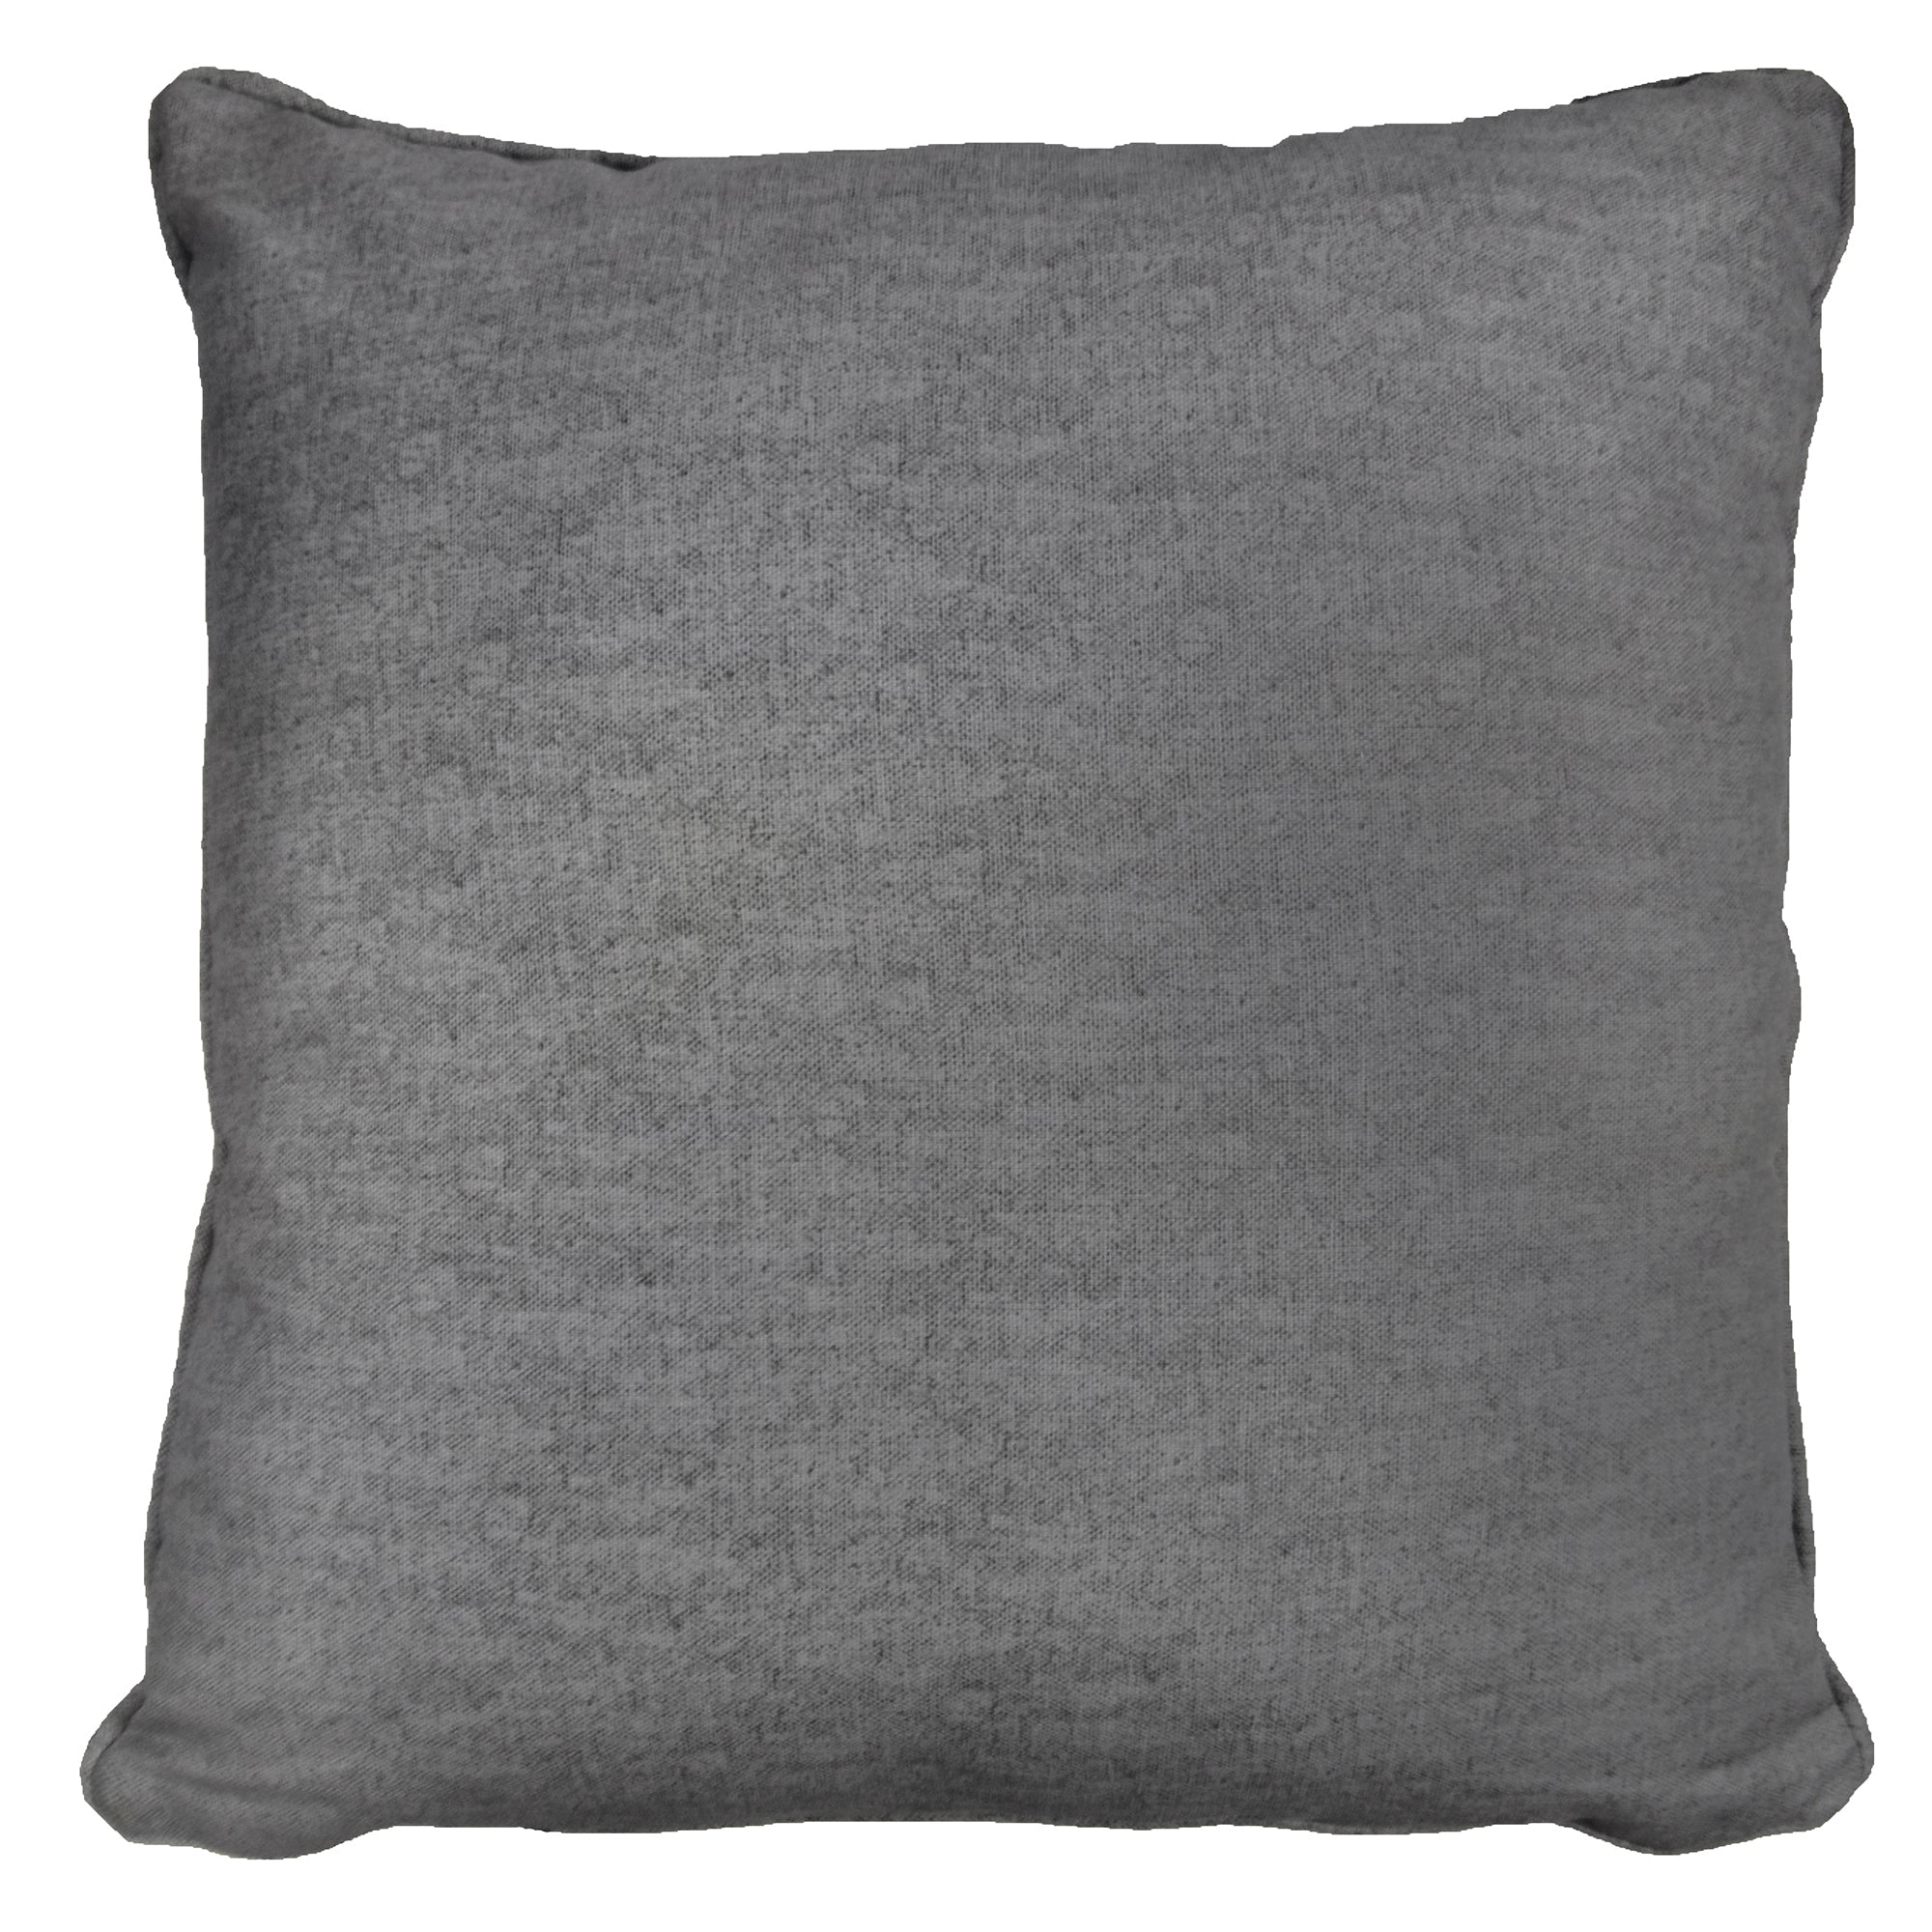 Sorbonne - 100% Cotton Filled Cushion in Charcoal - by Fusion